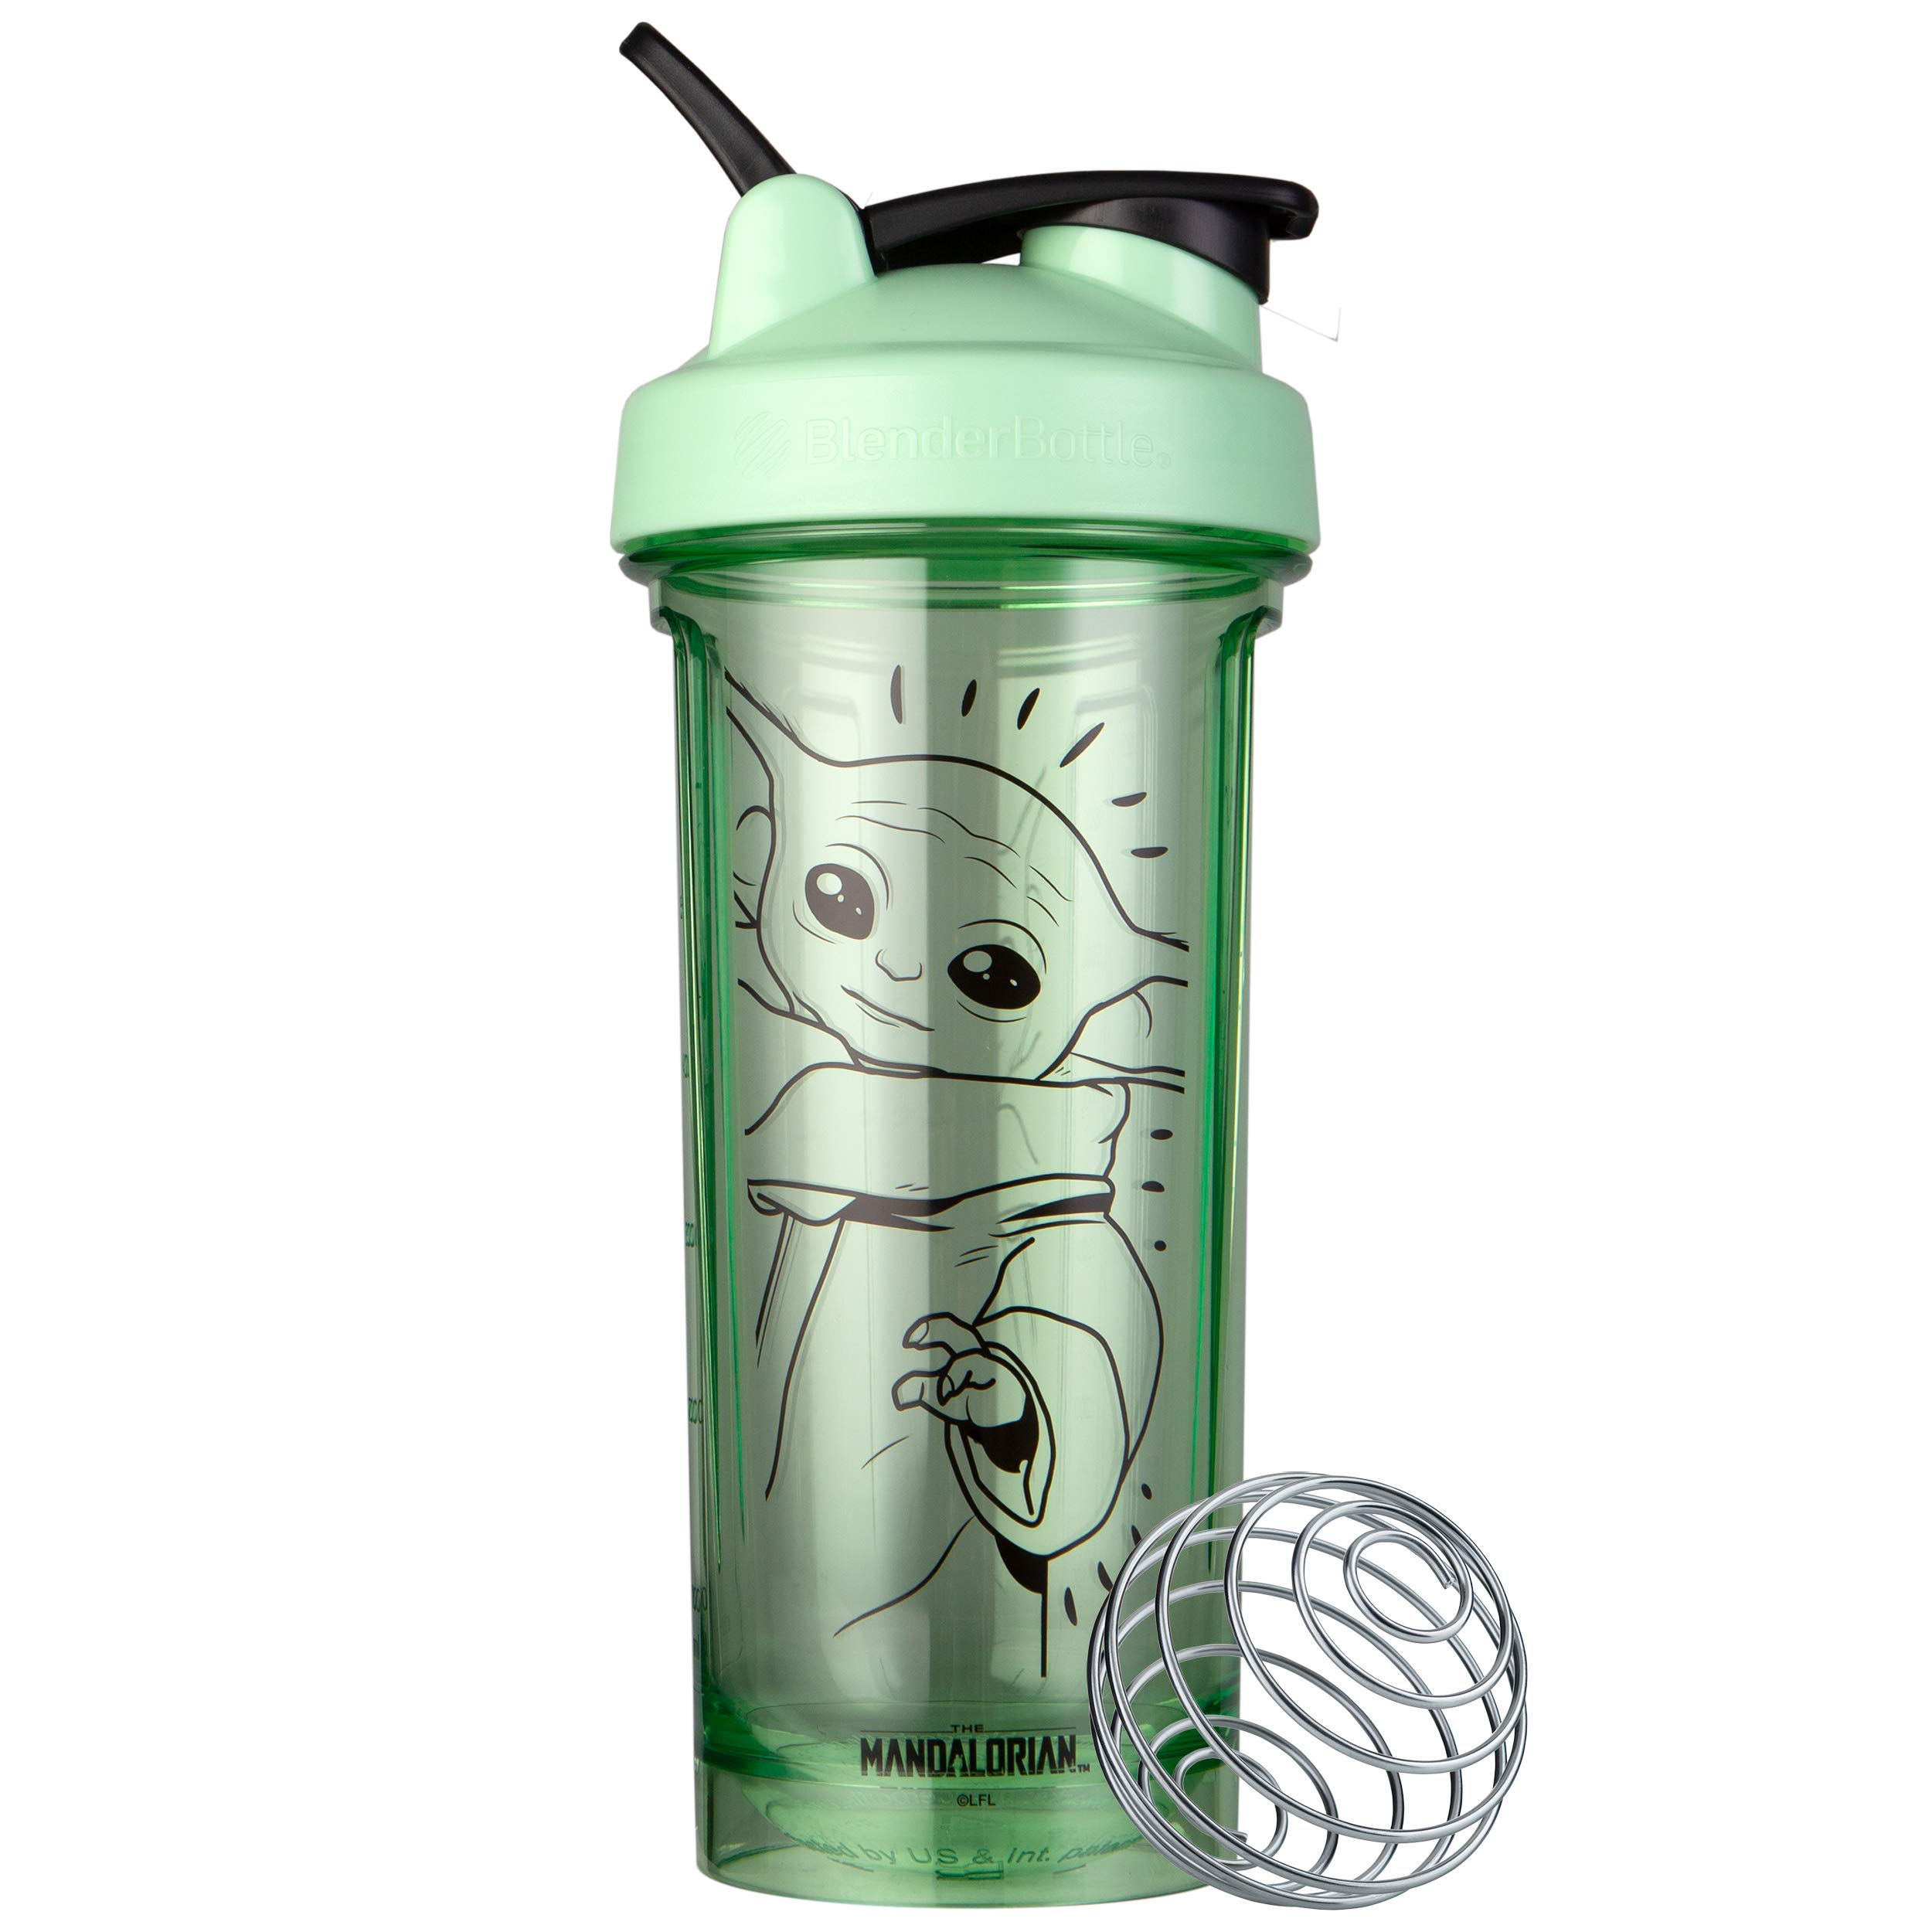 BlenderBottle Star Wars Shaker Bottle Pro Series Perfect for Protein Shakes and Pre Workout, 28-Ounce, The Child